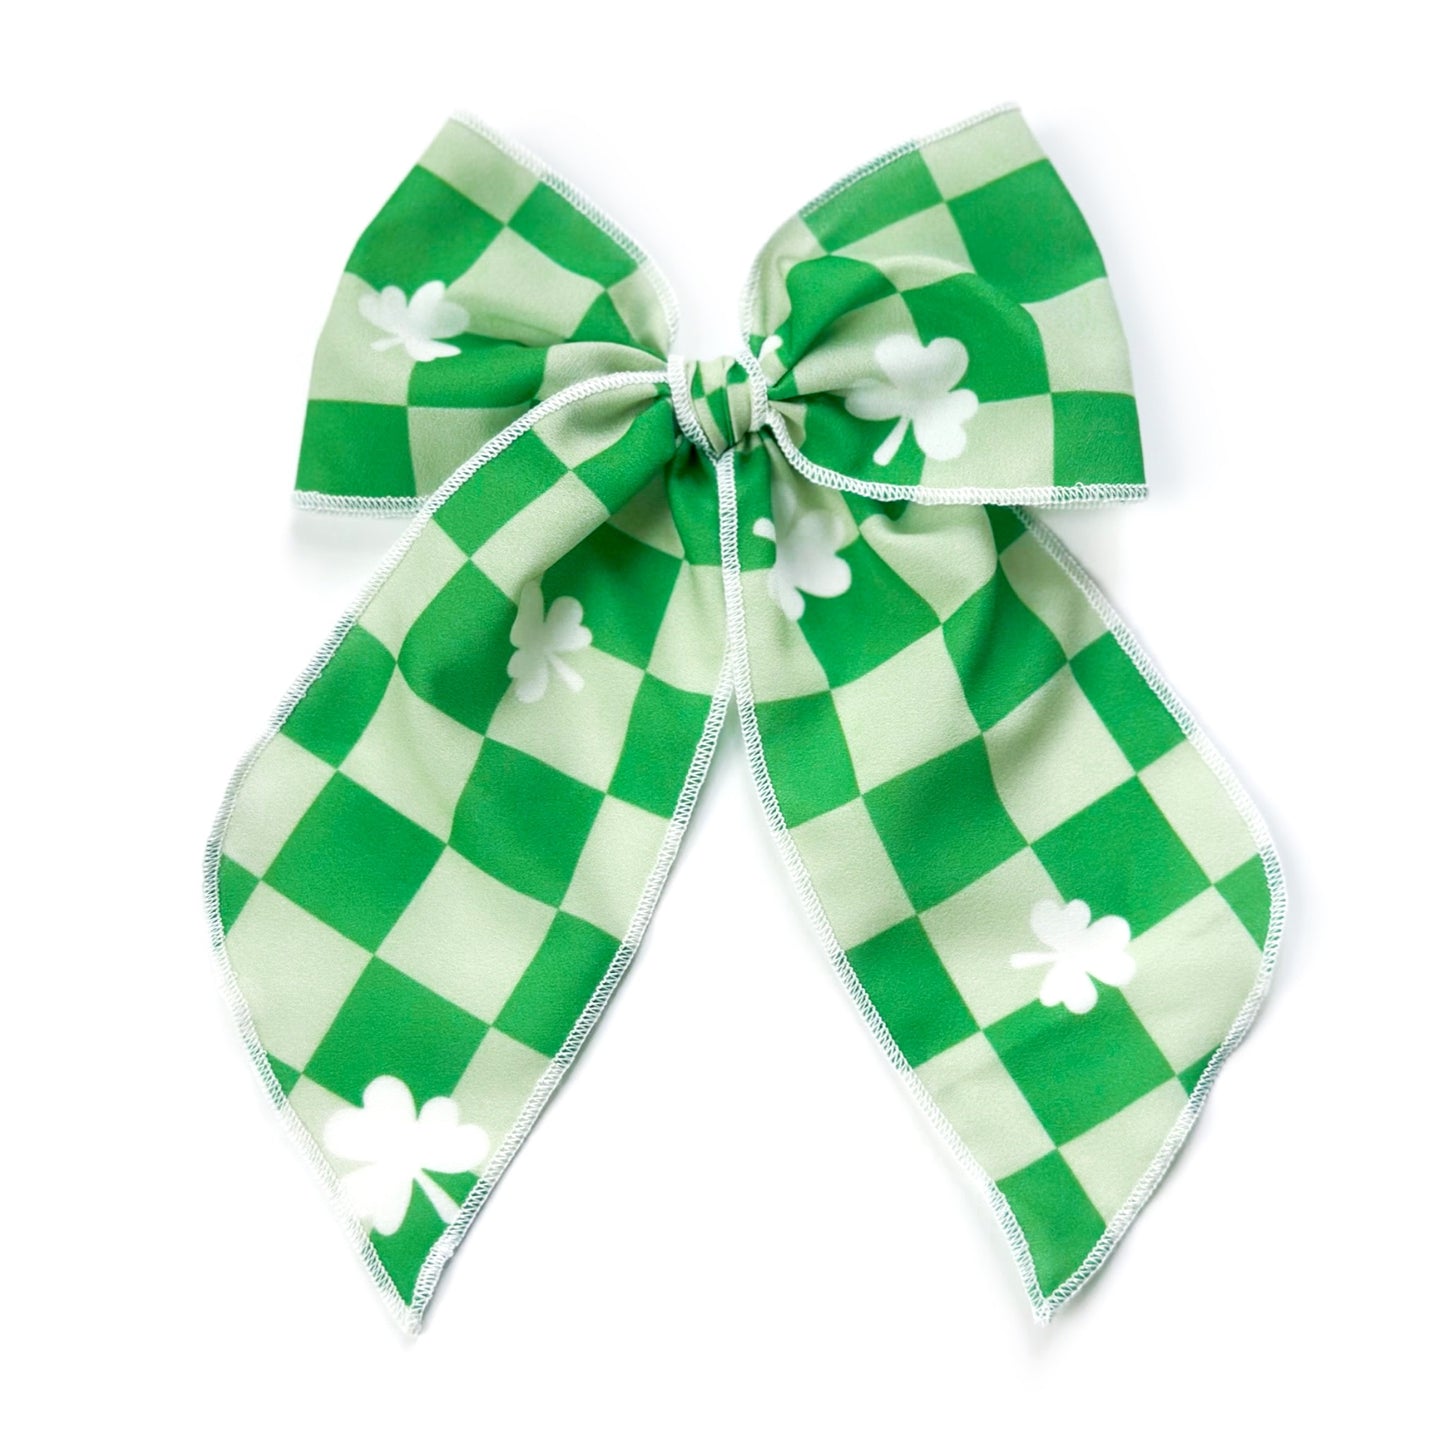 Checkerboard Clovers - Oversized Fairytale